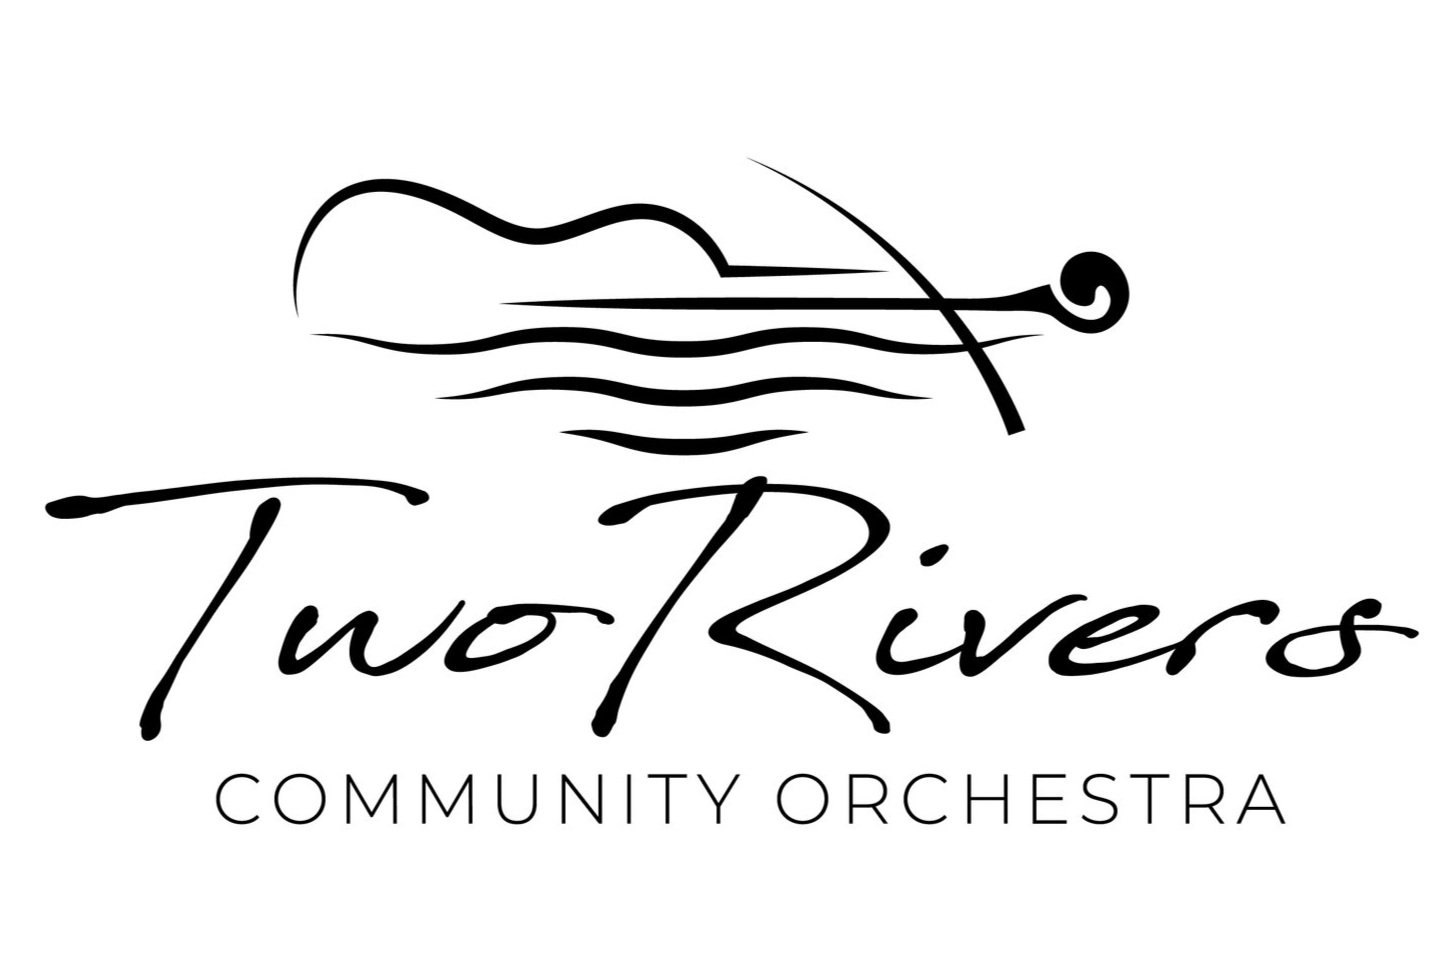 Two Rivers Community Orchestra